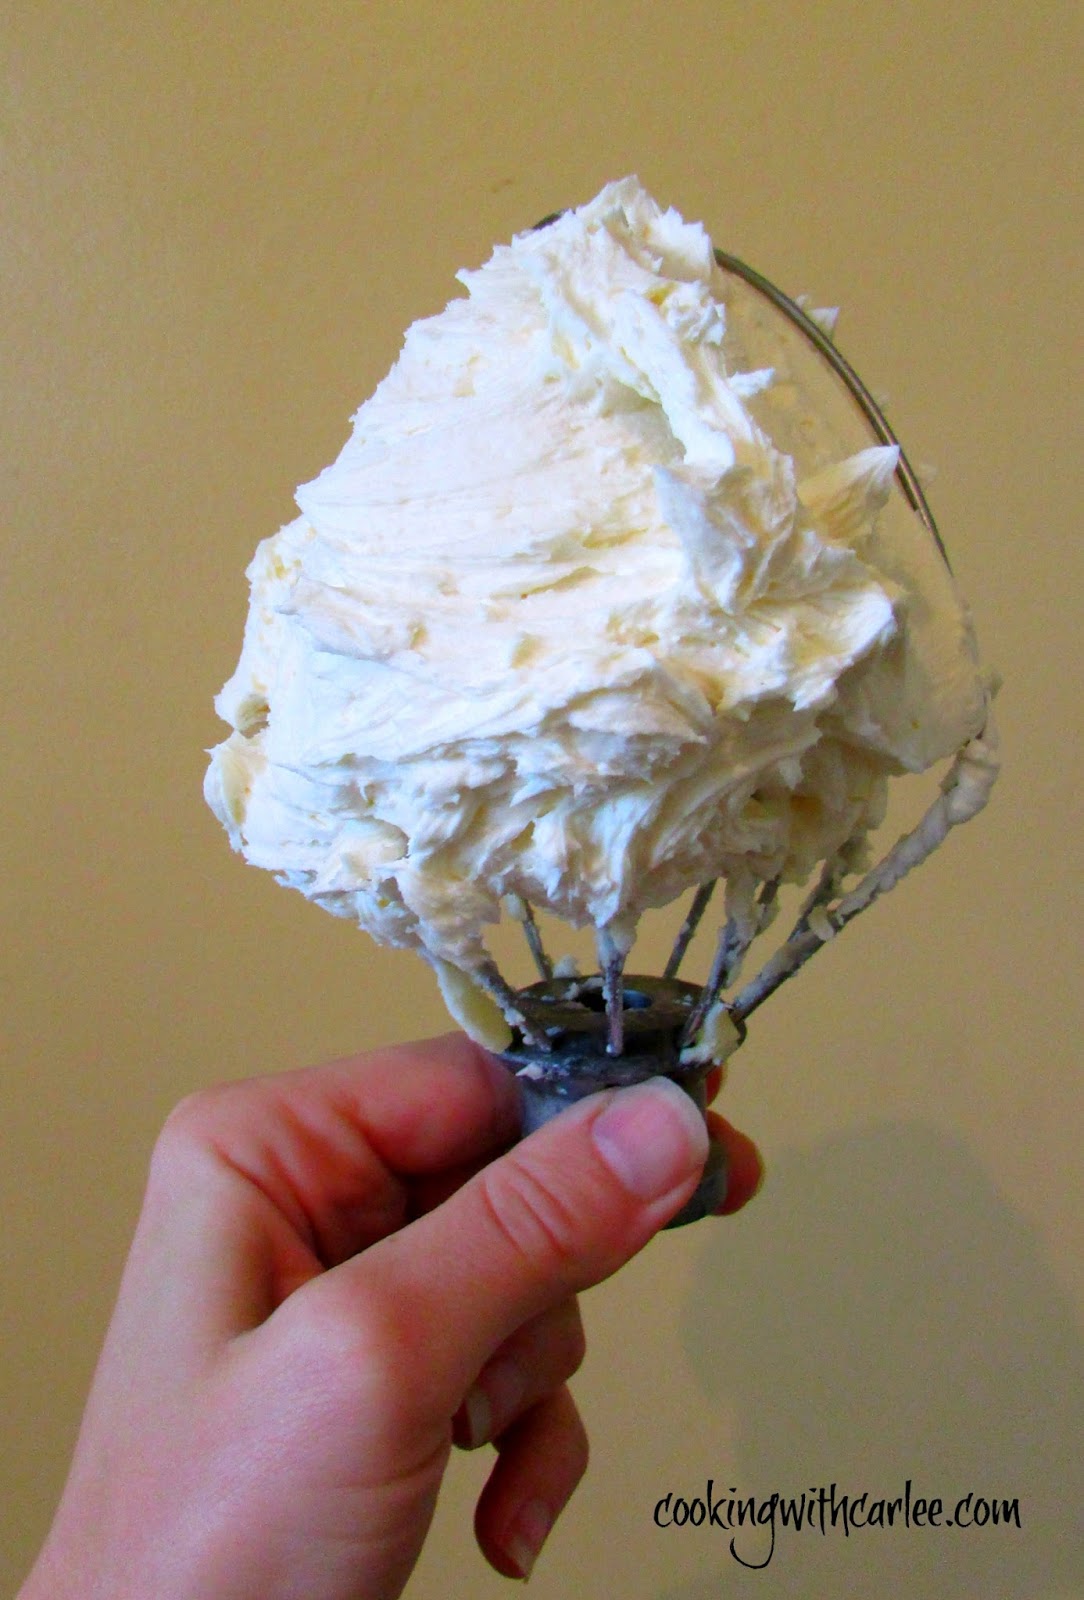 How do you make caramel frosting from condensed milk?